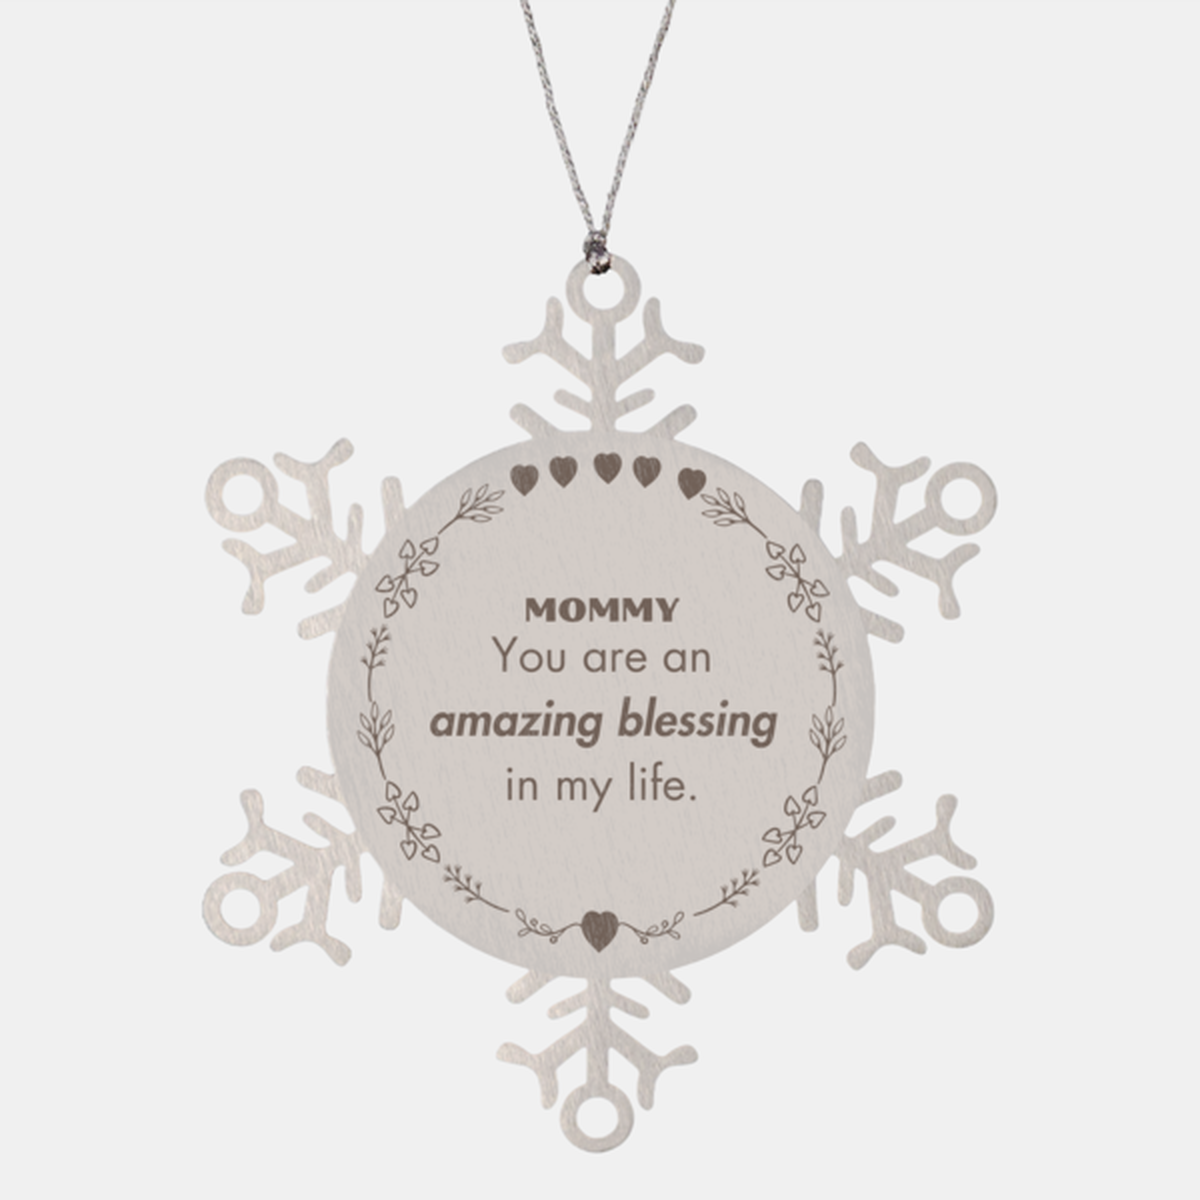 Mommy Snowflake Ornament, You are an amazing blessing in my life, Thank You Gifts For Mommy, Inspirational Birthday Christmas Unique Gifts For Mommy